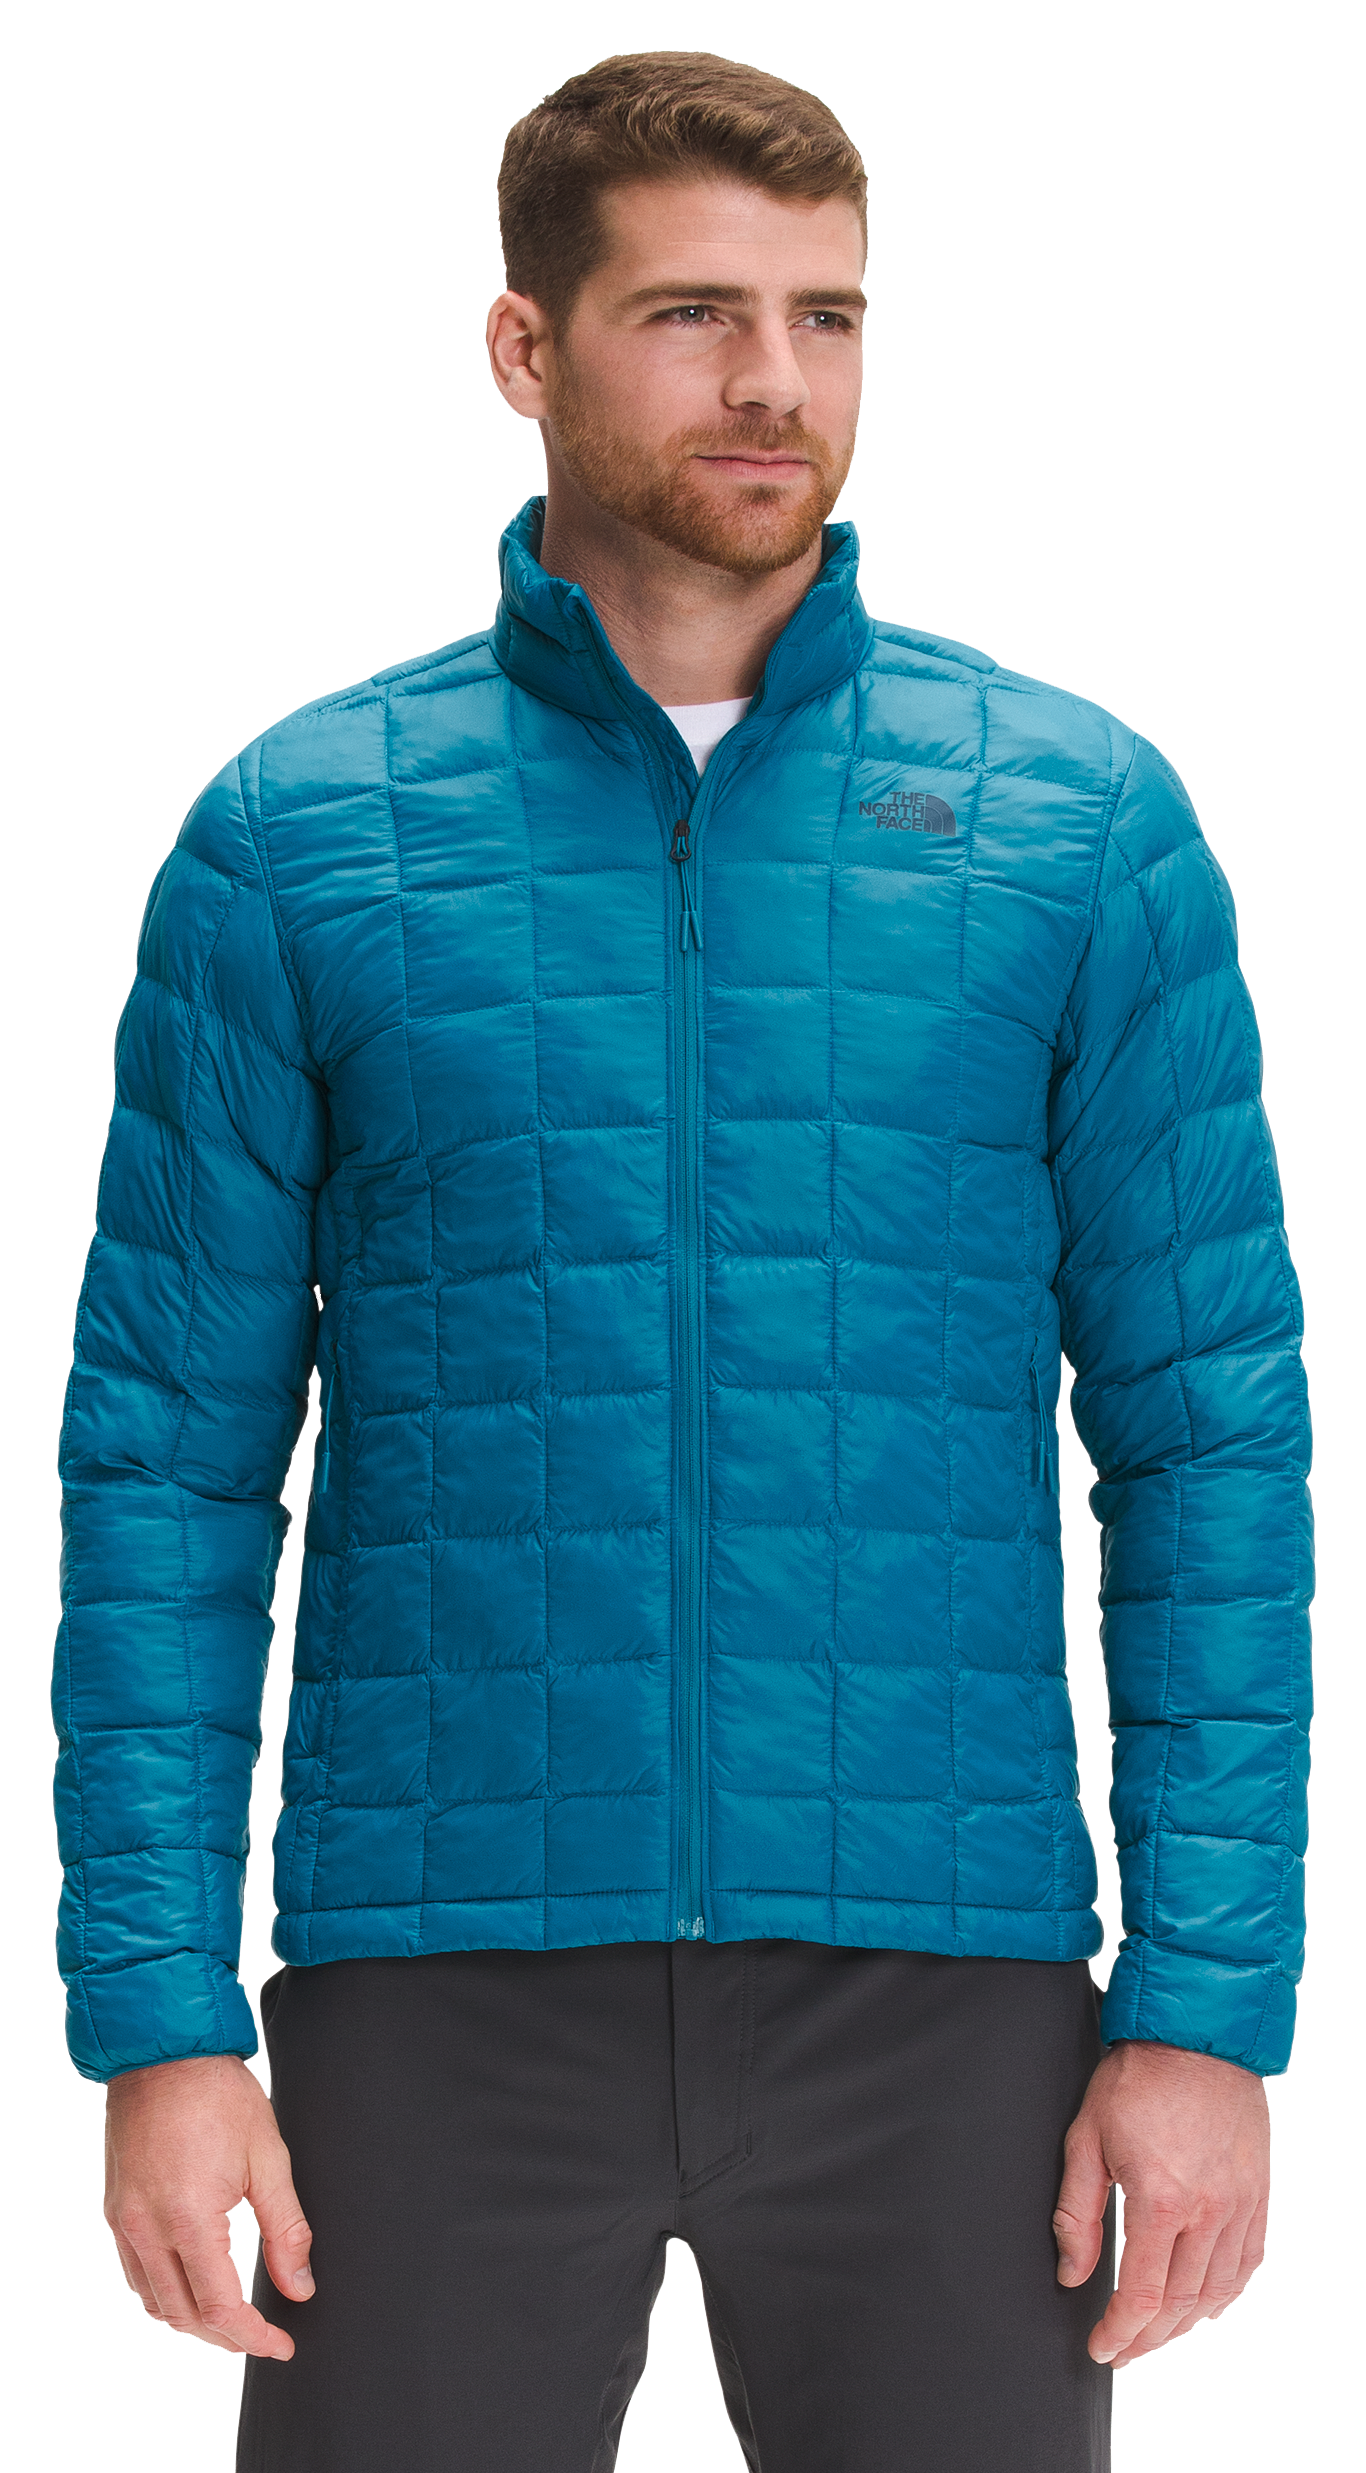 The North Face ThermoBall Eco Quilted Jacket for Men - Banff Blue - 2XL